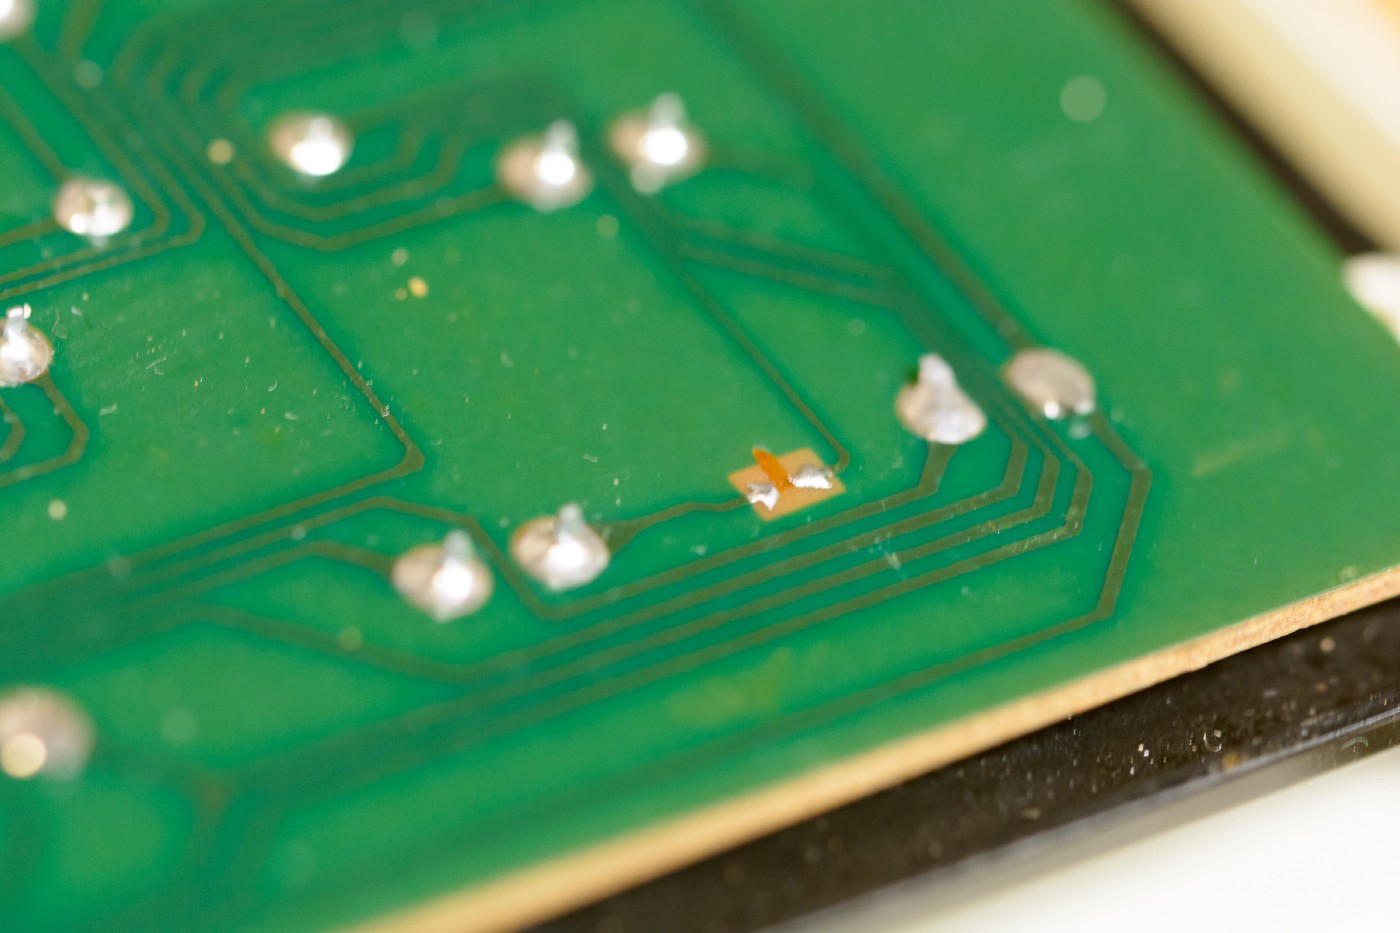 A macro image of a printed circuit board. There are many soldered component legs. In the middle is a small copper pad, with two disconnected blobs of solder.